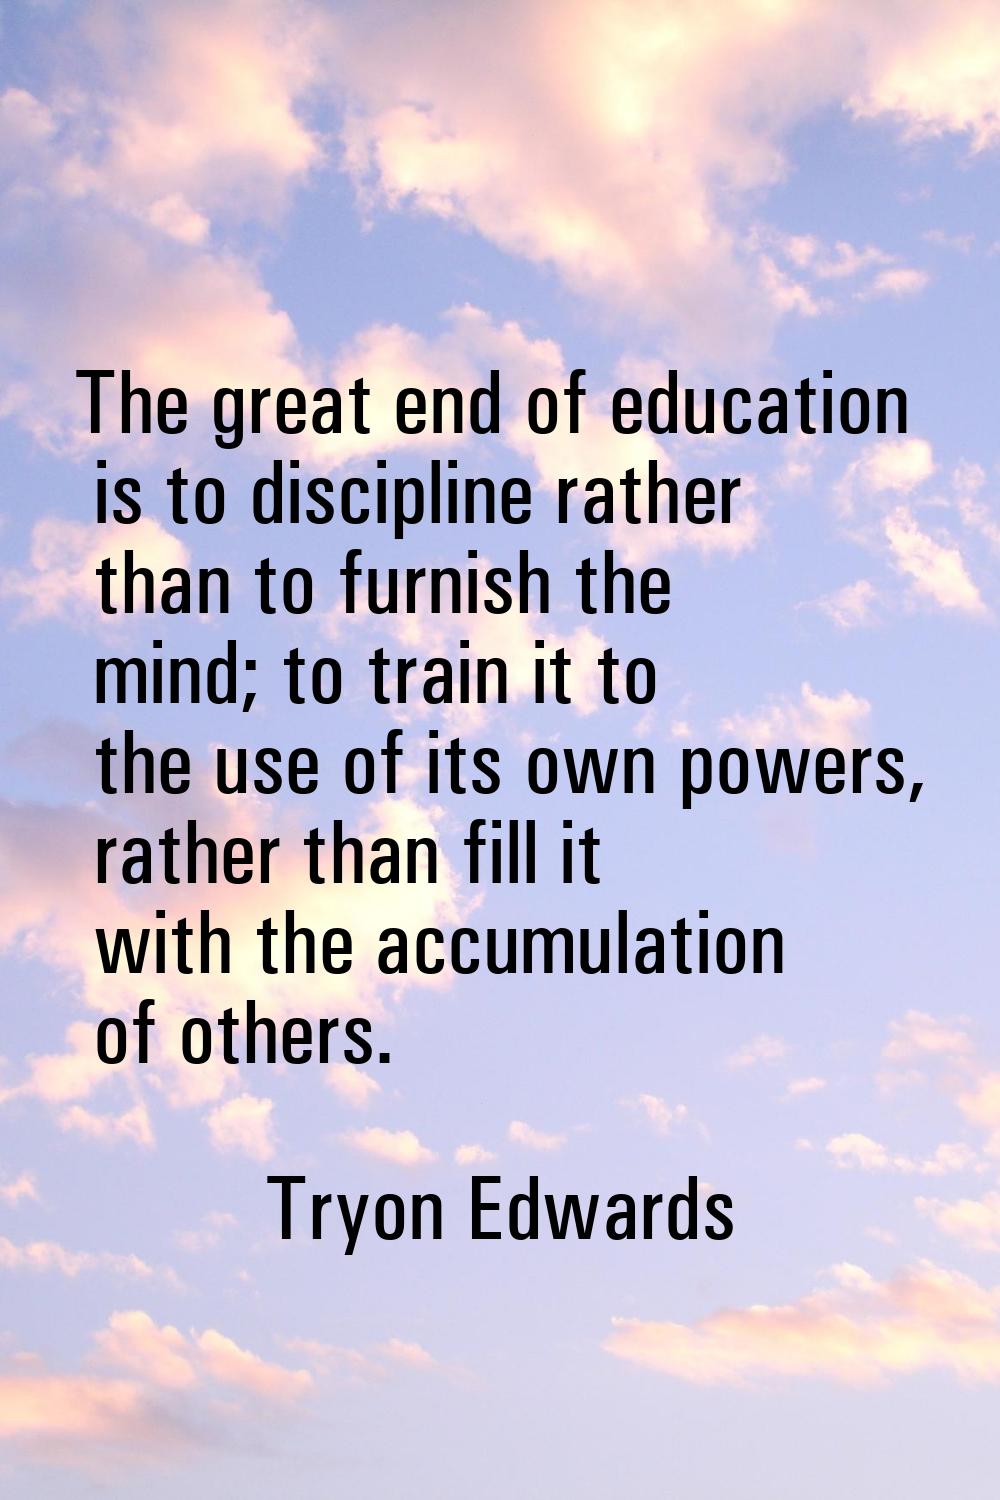 The great end of education is to discipline rather than to furnish the mind; to train it to the use